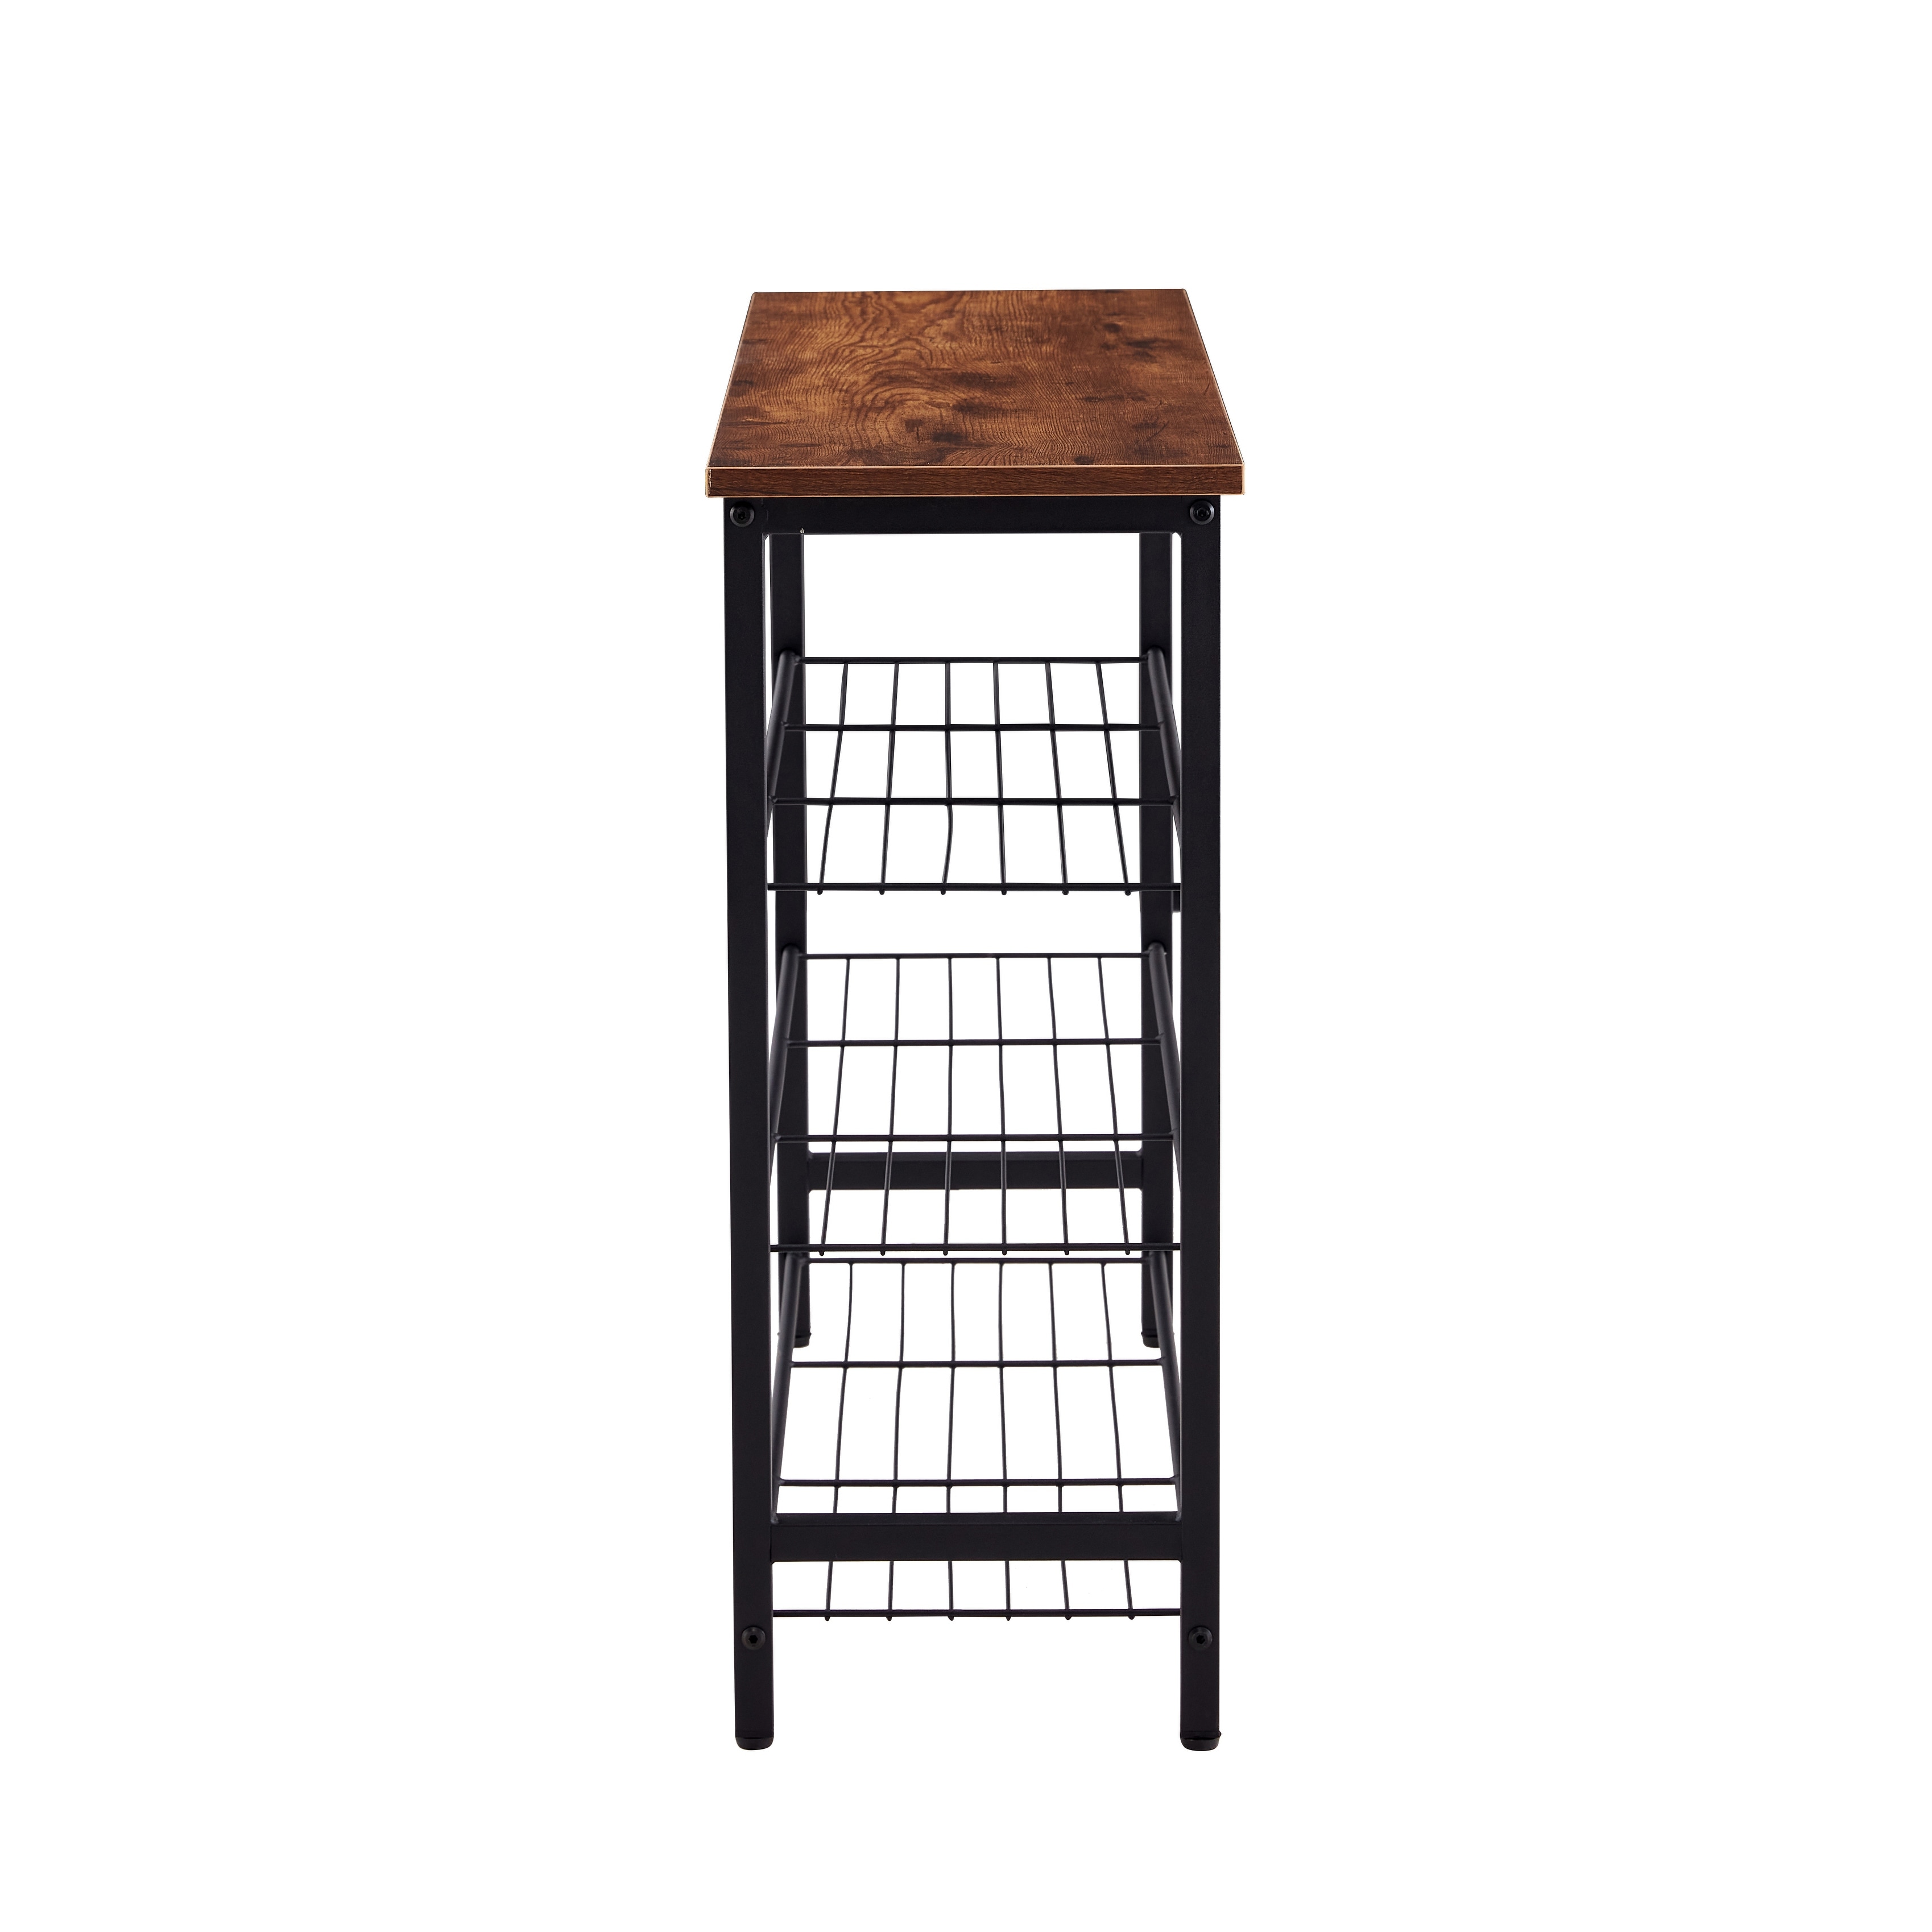 https://ak1.ostkcdn.com/images/products/is/images/direct/12d17b98d37fd23500cdeaee49394dbfb74a806f/DN-4-Tier-Metal-Shoe-Rack%2C-Modern-Multifunctional-Shoe-Storage-Shelf-with-MDF-Top-Board%2C-1-pc-per-carton.jpg